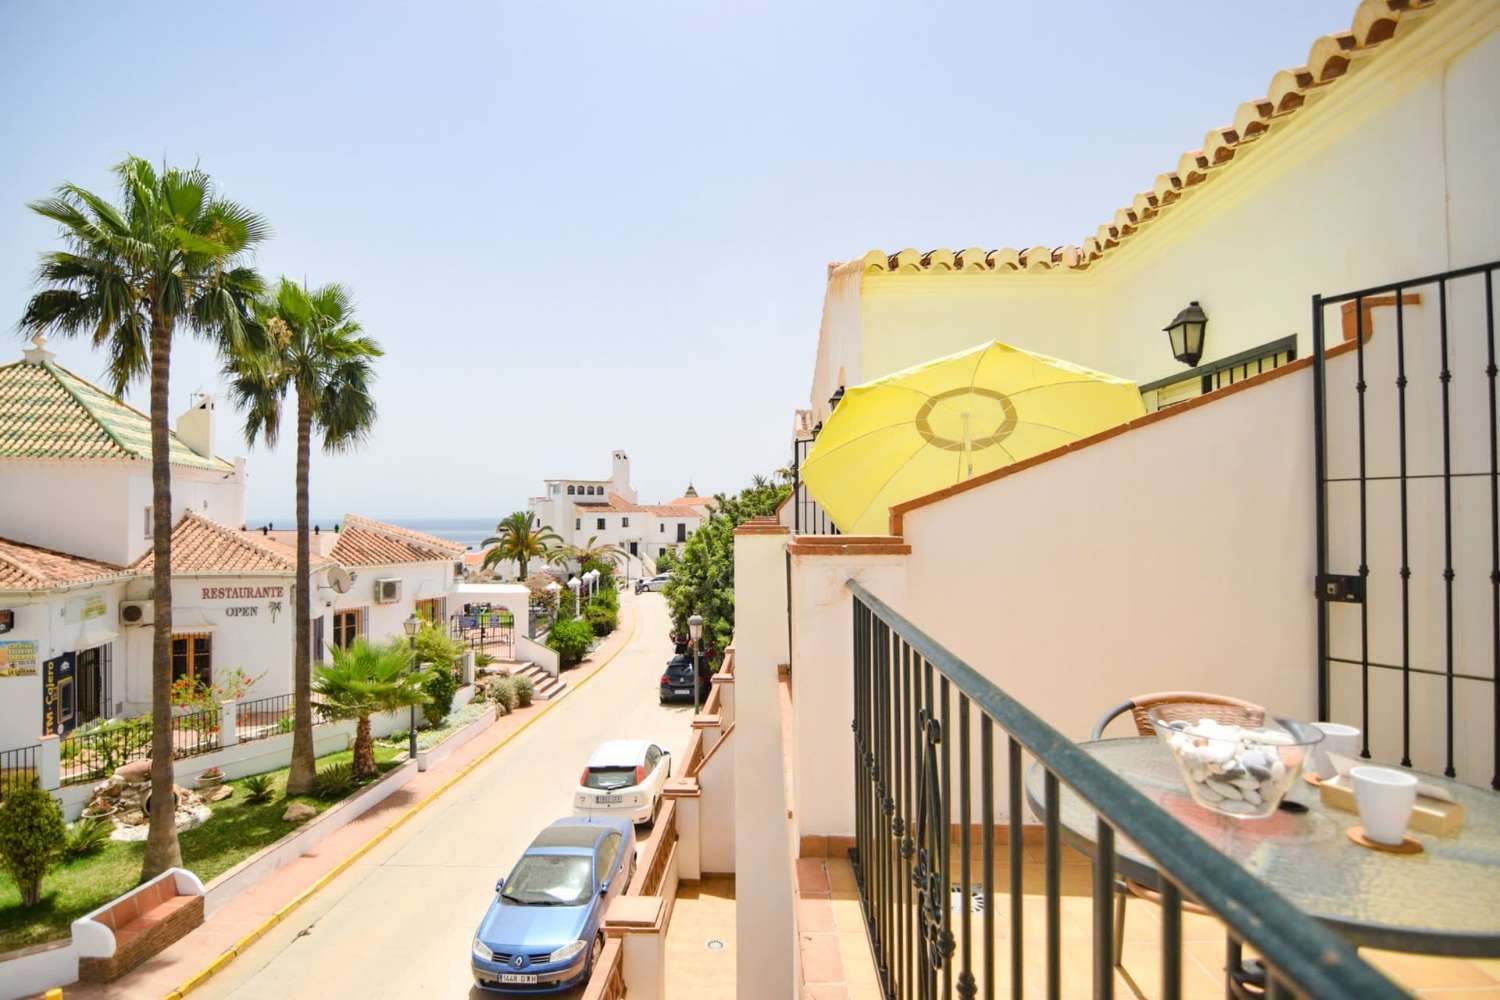 Excellent apartments a few steps from Burriana beach